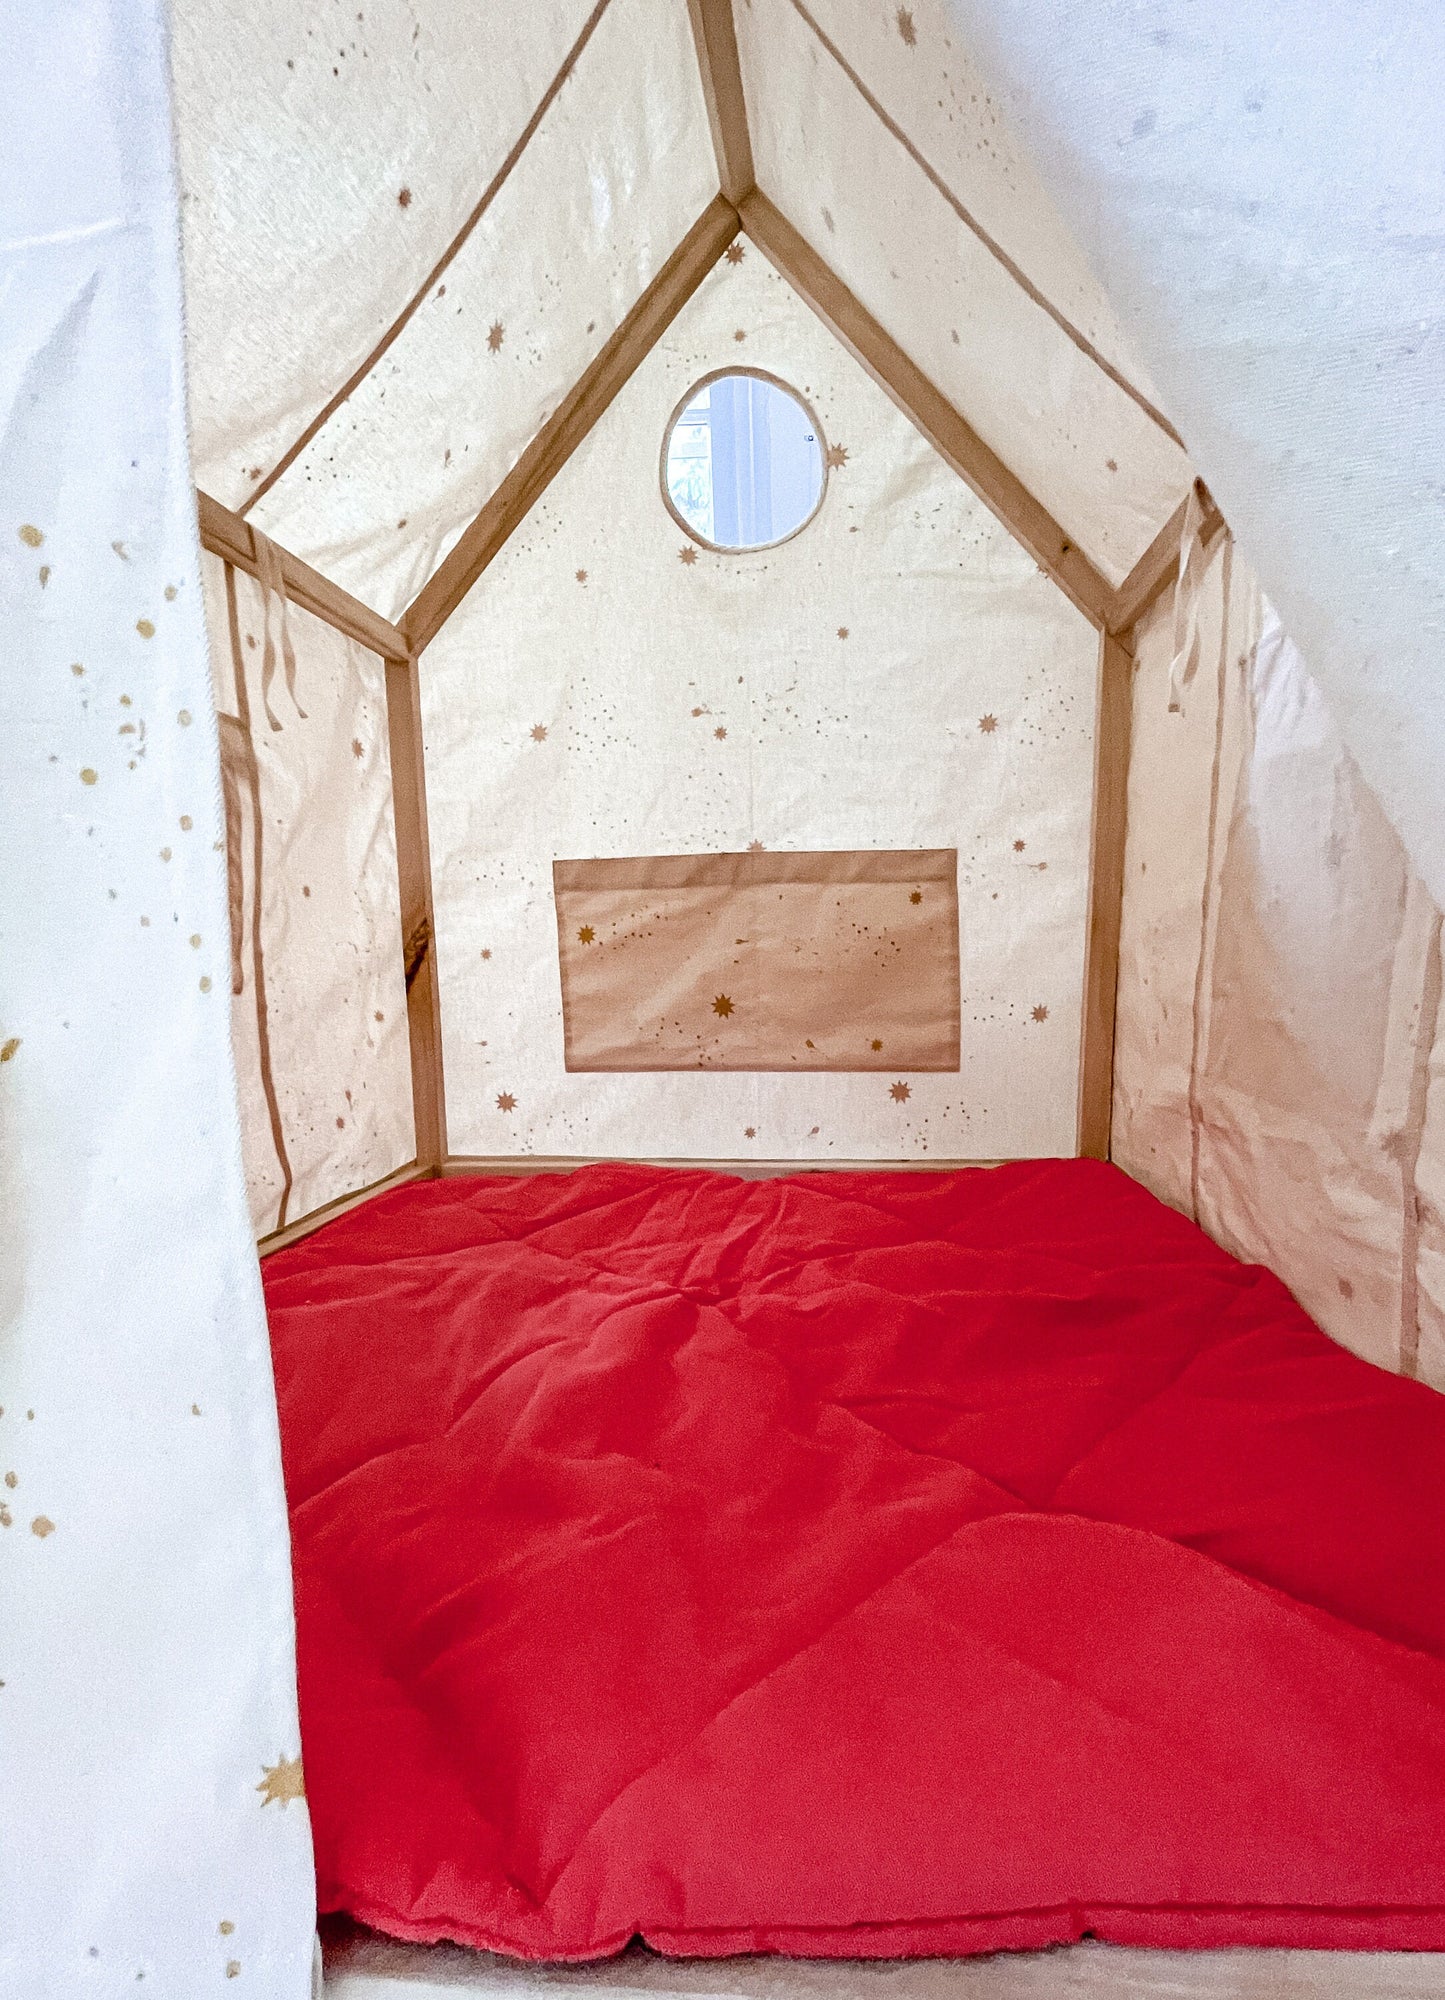 Milk color playhouse with Gold Stars print. Play house for children. Soft red mat for playing. Teepee tent - Christmas gift